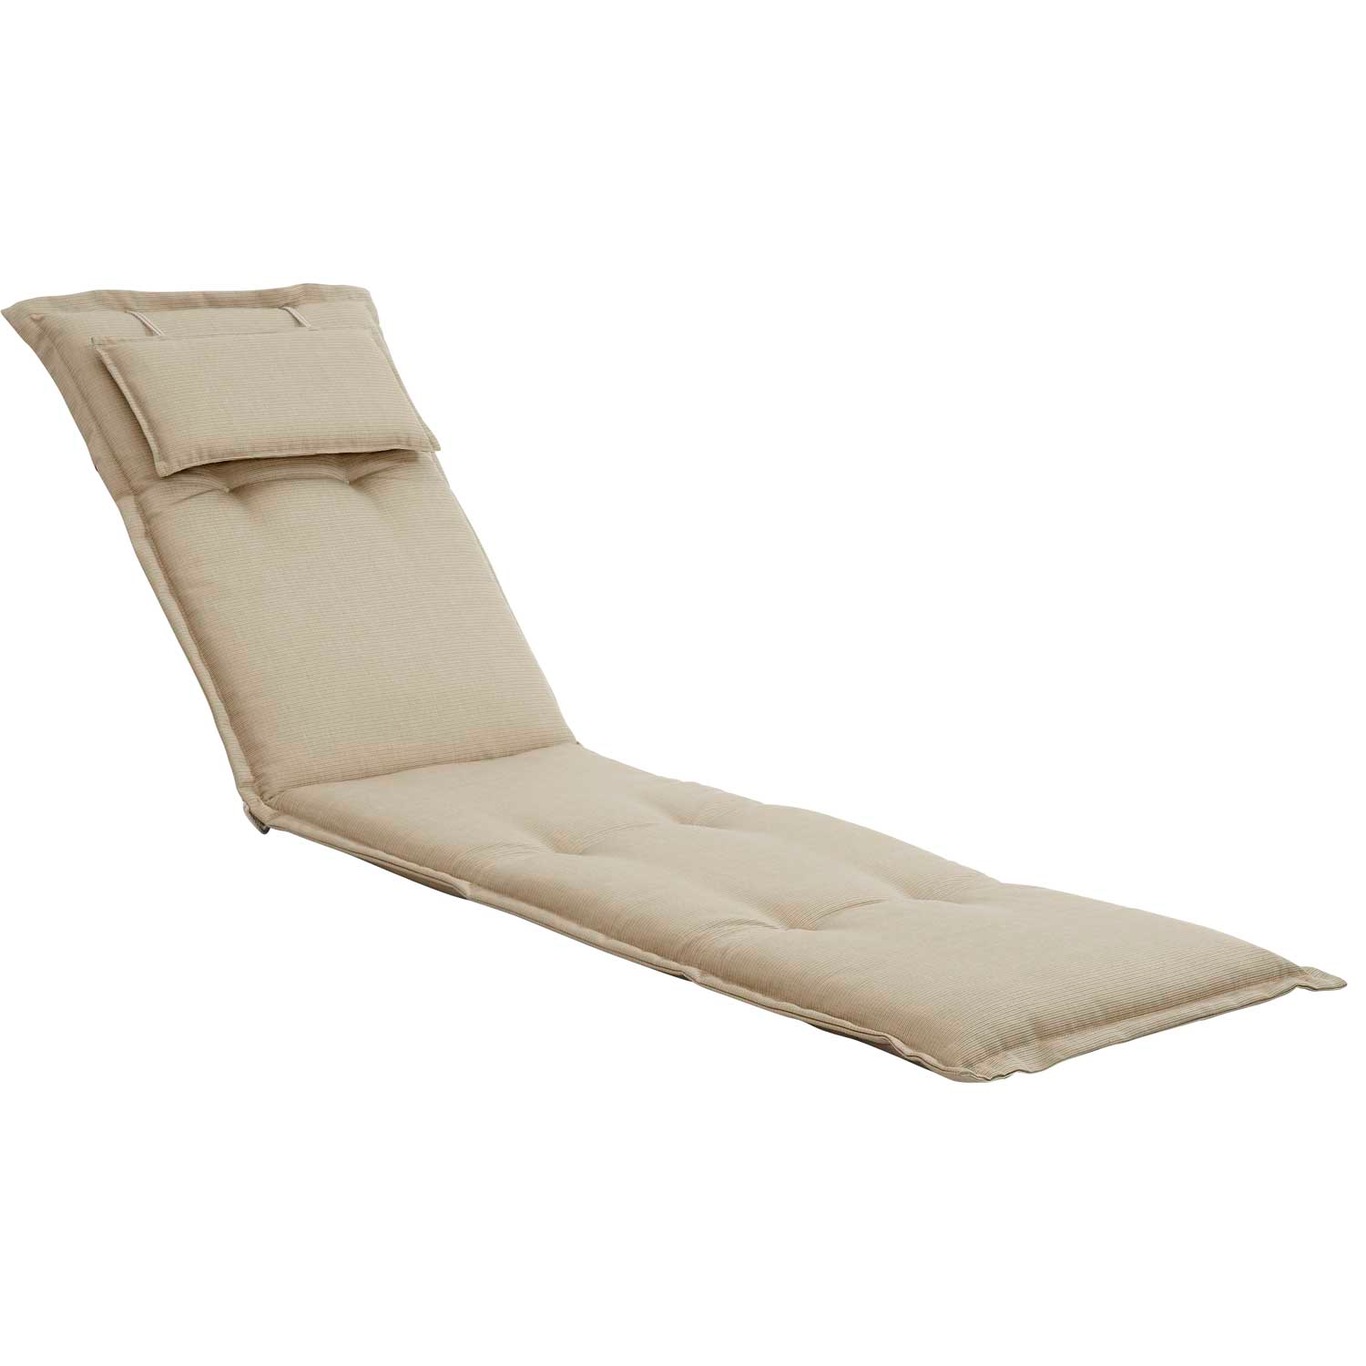 Florina Restbed Pad 49, Taupe